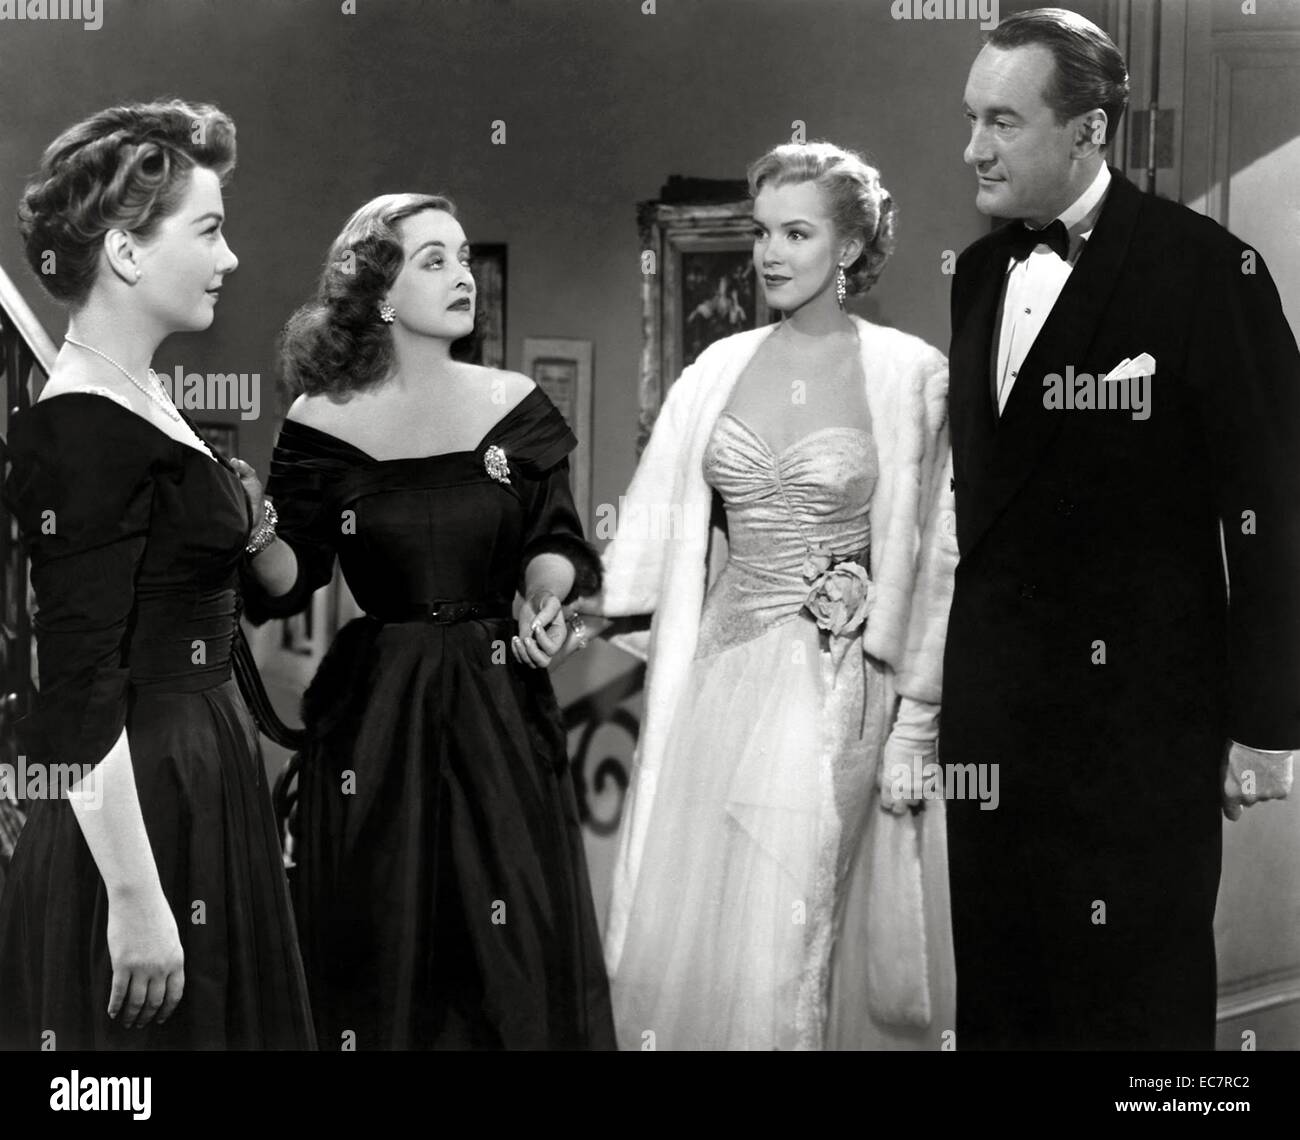 All About Eve is a 1950 American drama film written and directed by Joseph Mankiewicz. Starring Bette Davis as a Broadway star the film tells the story of a young fan - Anne Baxter - who threatens Davis' career and personal life. The film sits on United States' National Film Registry. Stock Photo